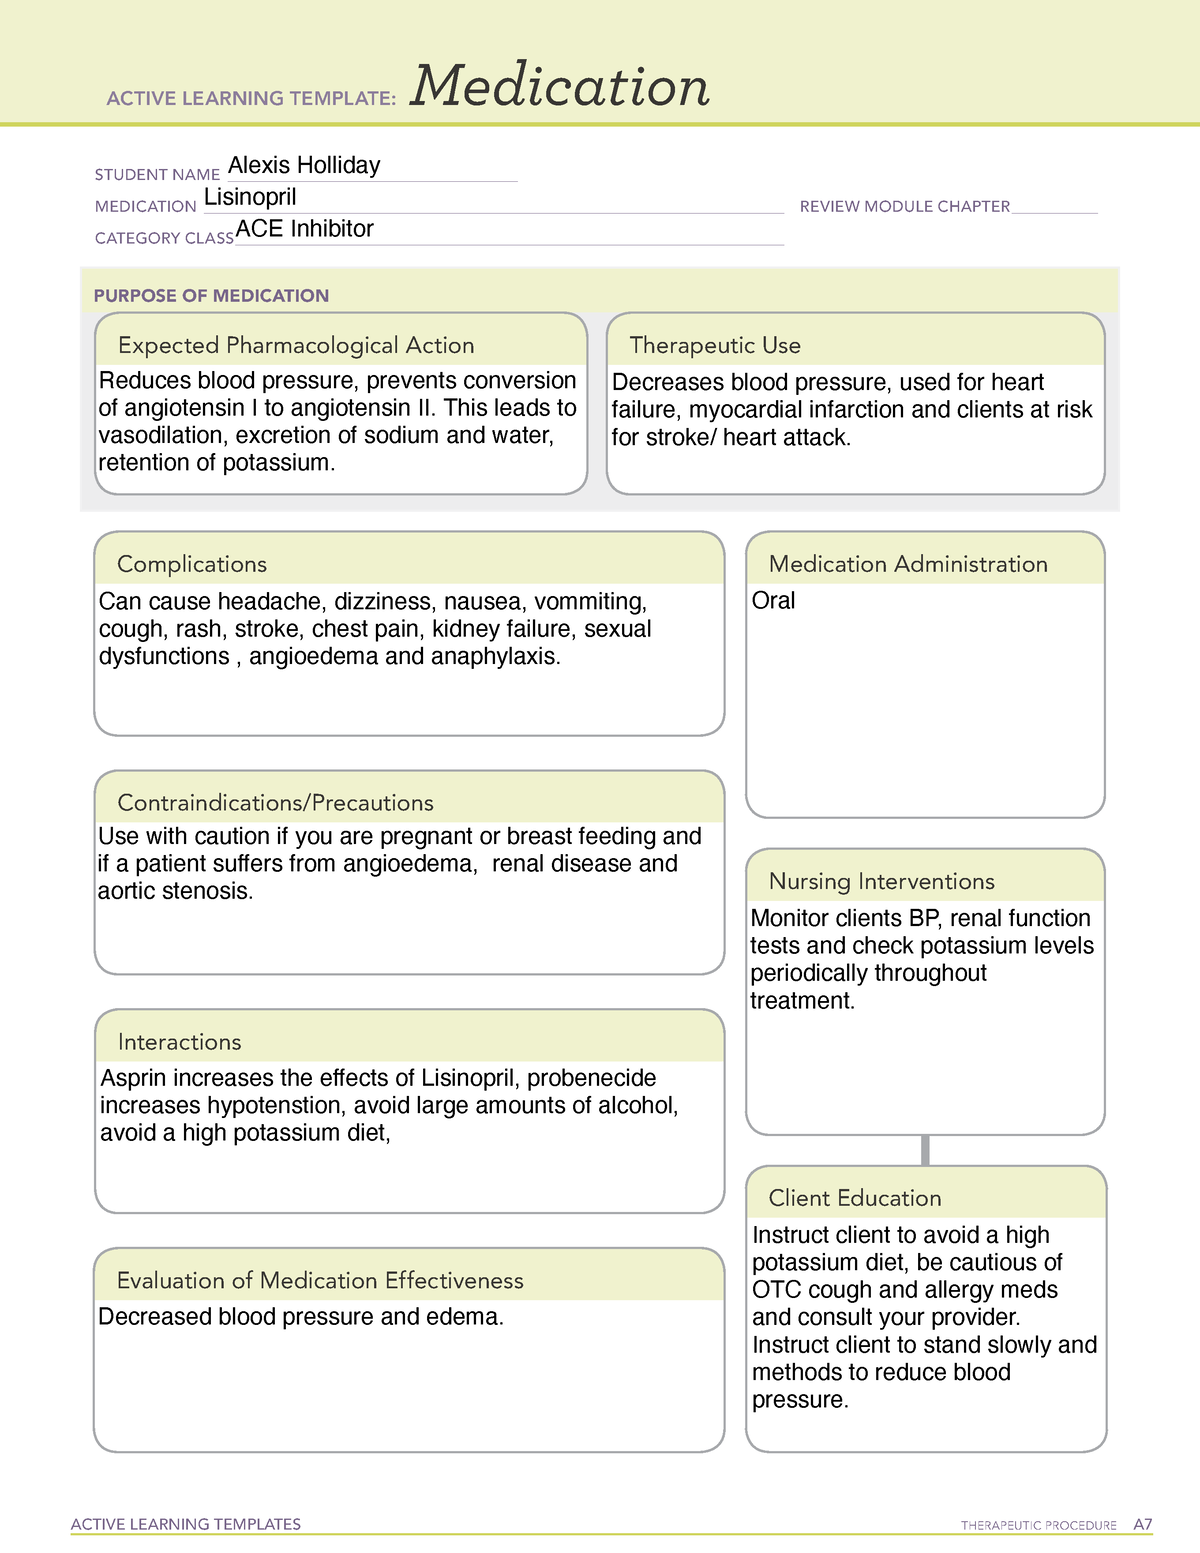 Med Template Lisinopril ACTIVE LEARNING TEMPLATES THERAPEUTIC